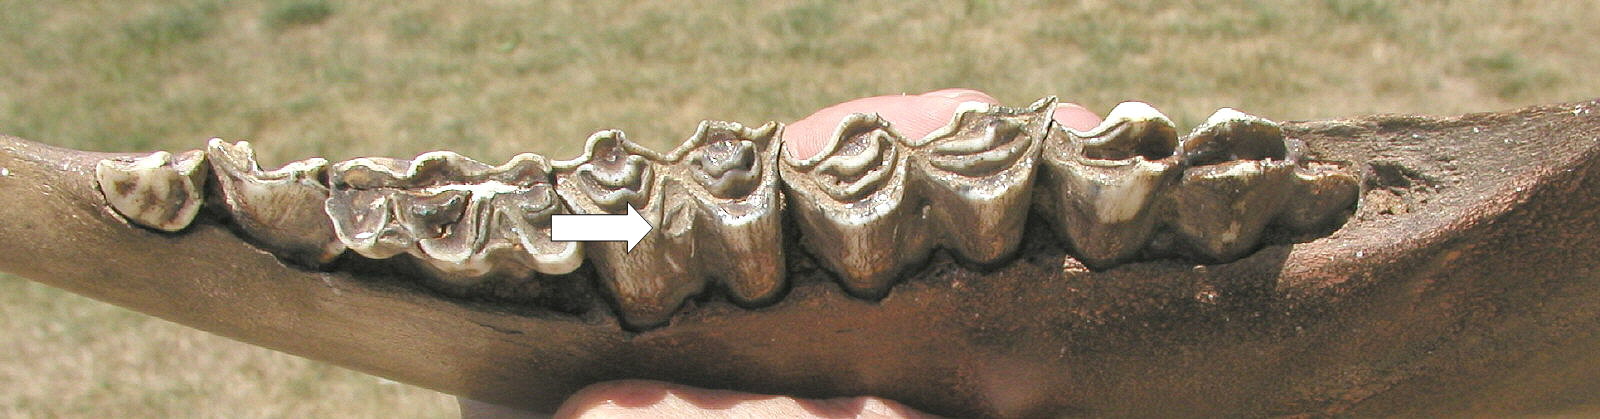 bison tooth with stylid